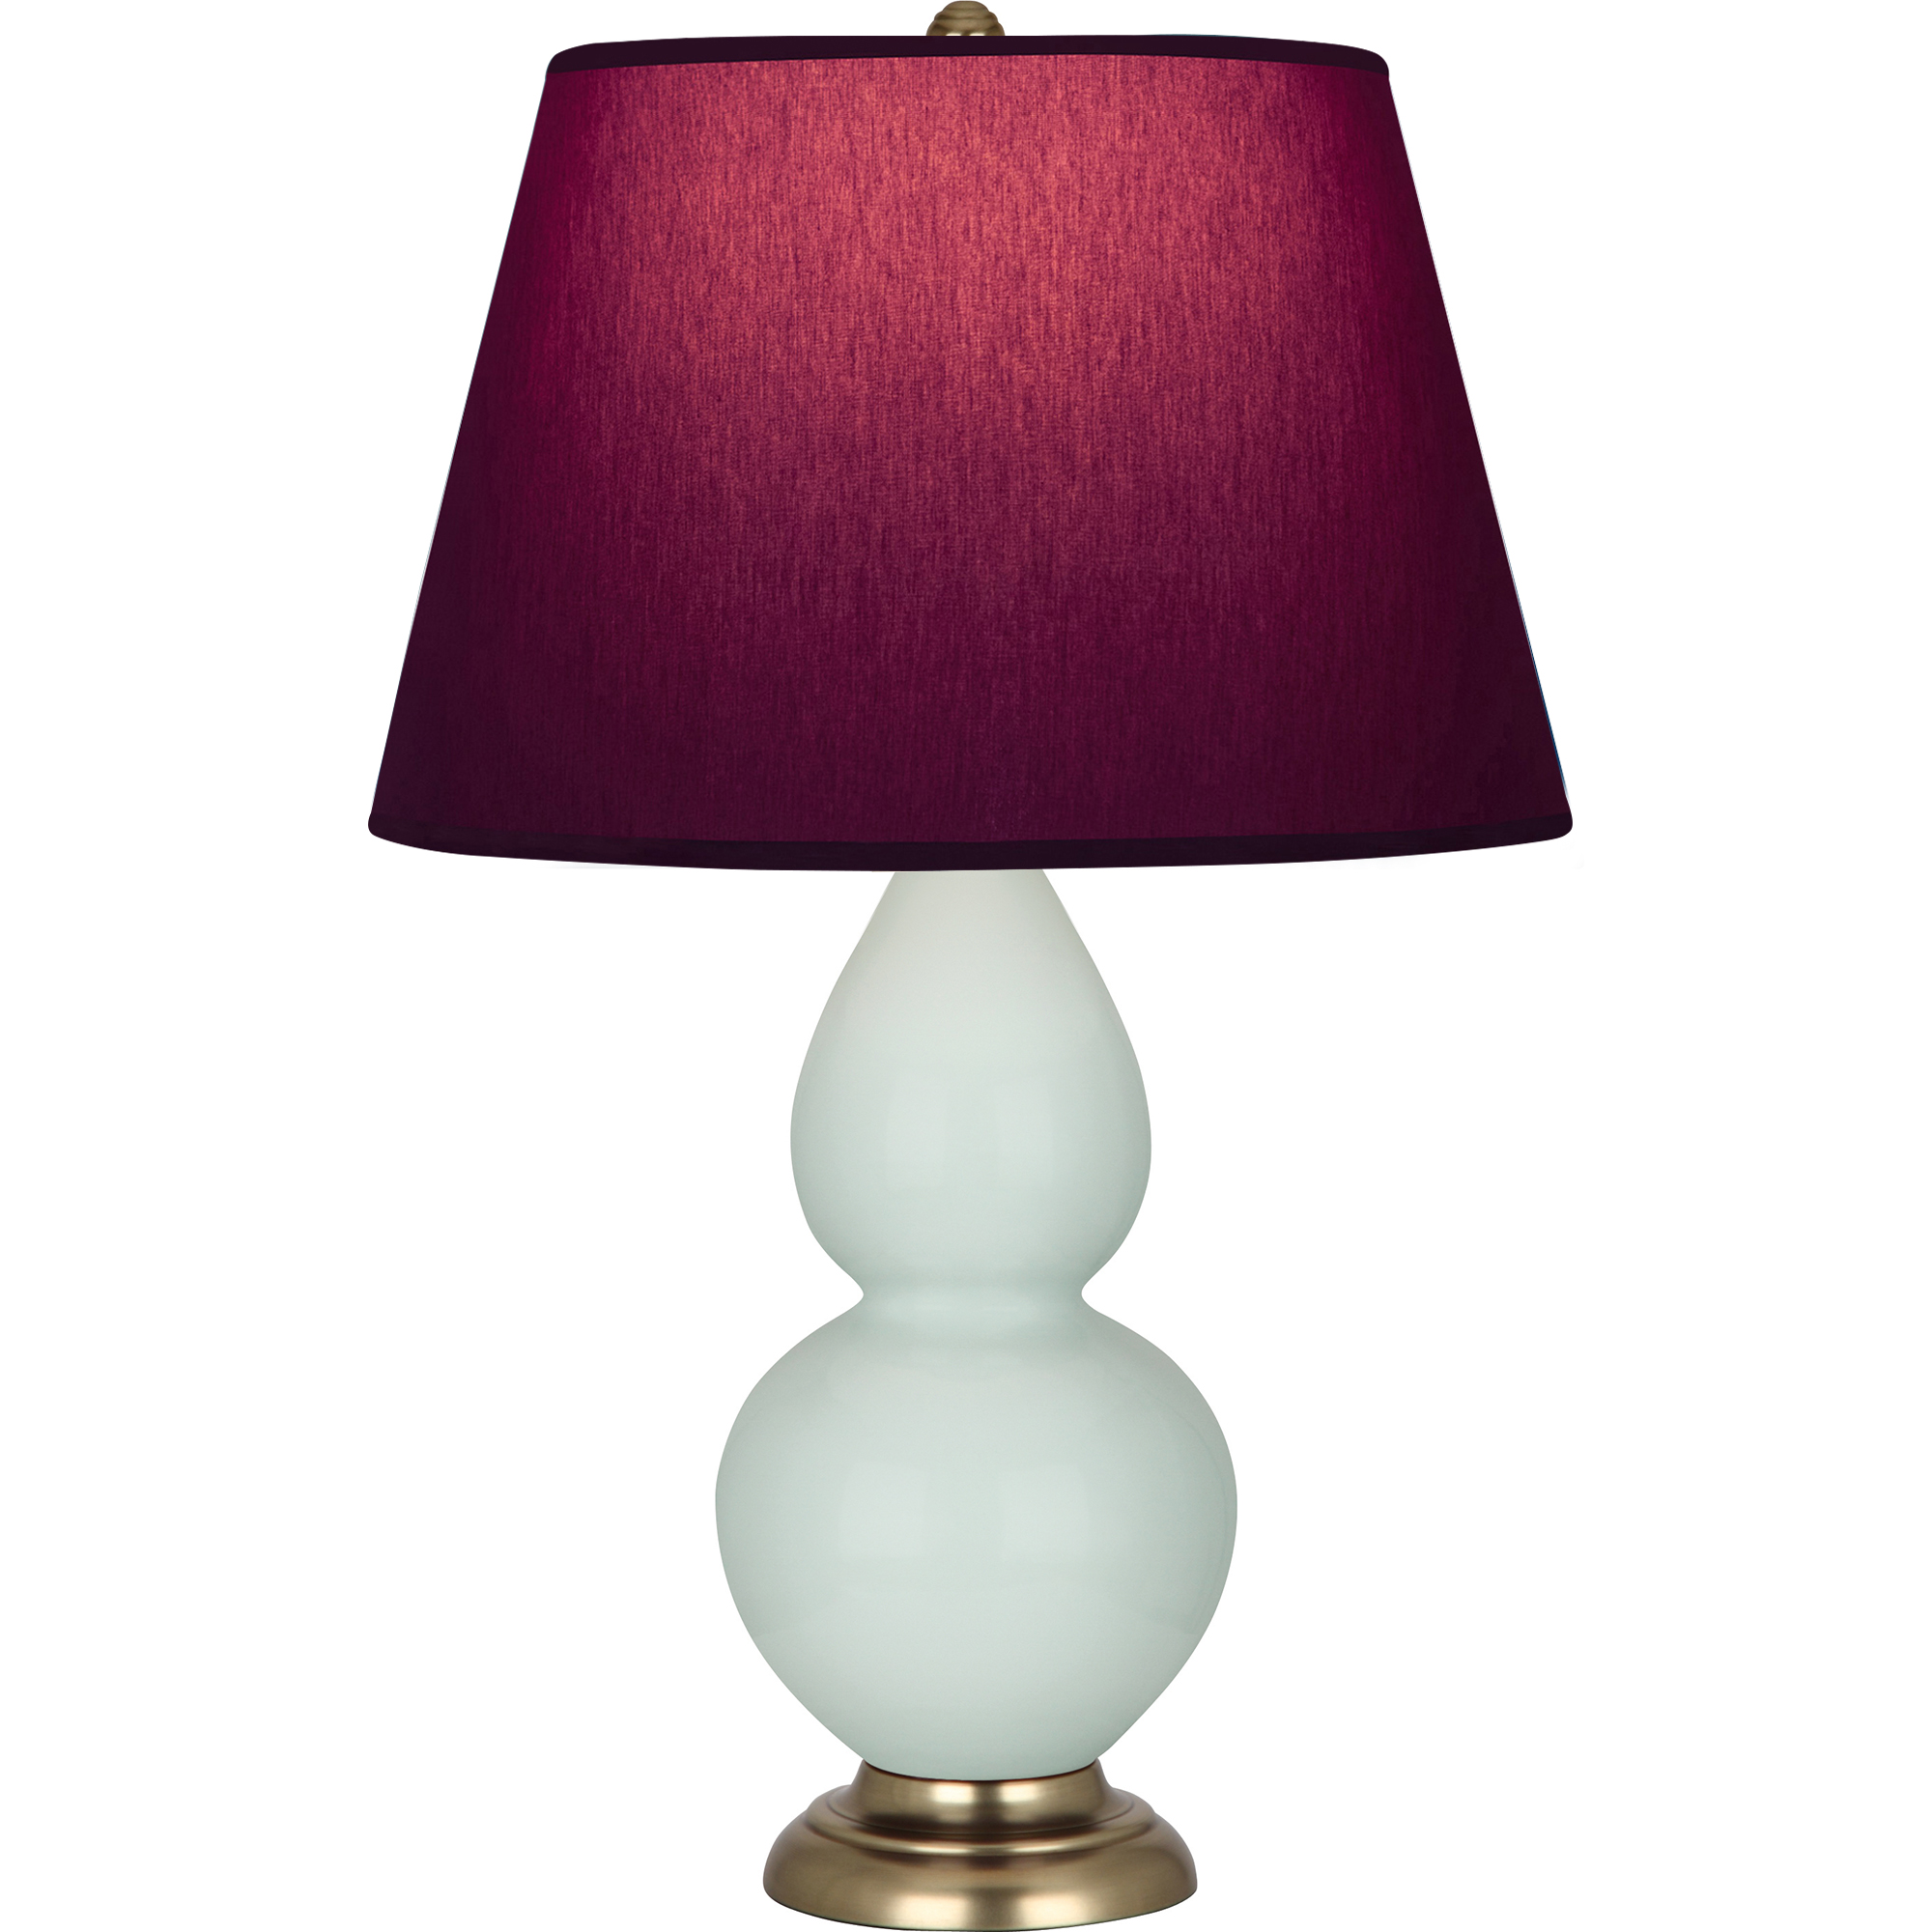 Double Gourd Table Lamp Style #1789P